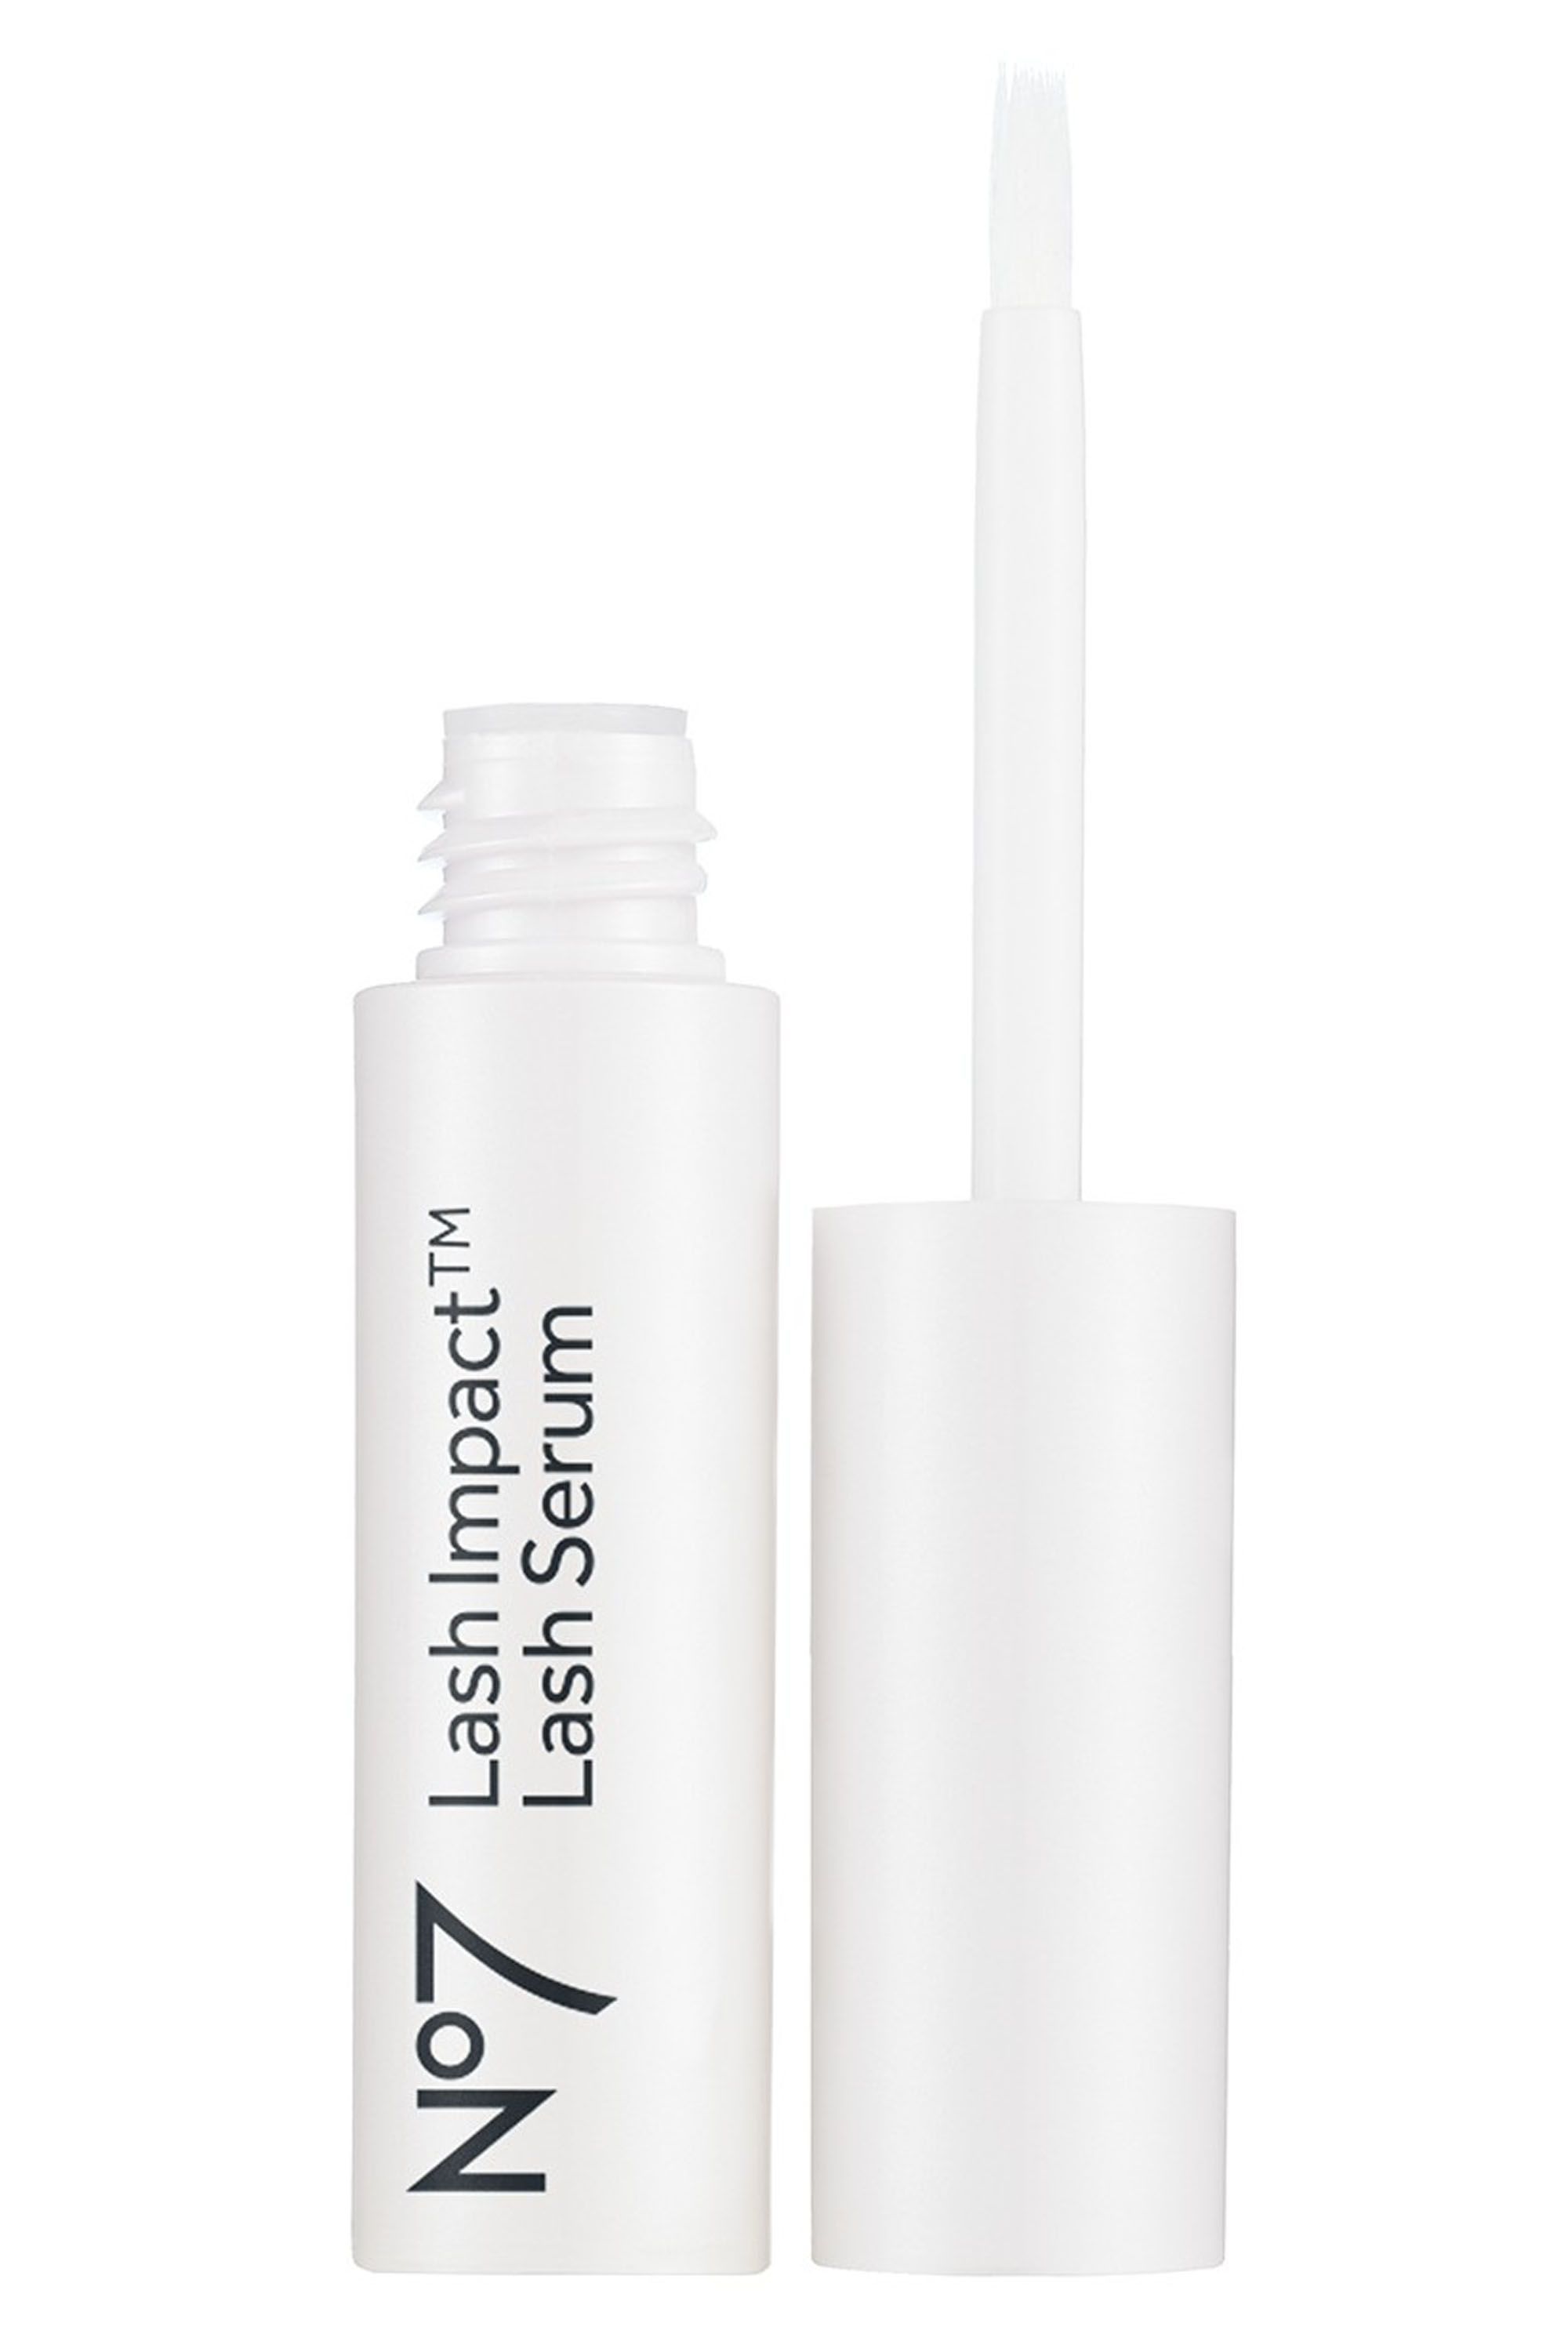 "This lash serum defined my lashes well," writes one review after...